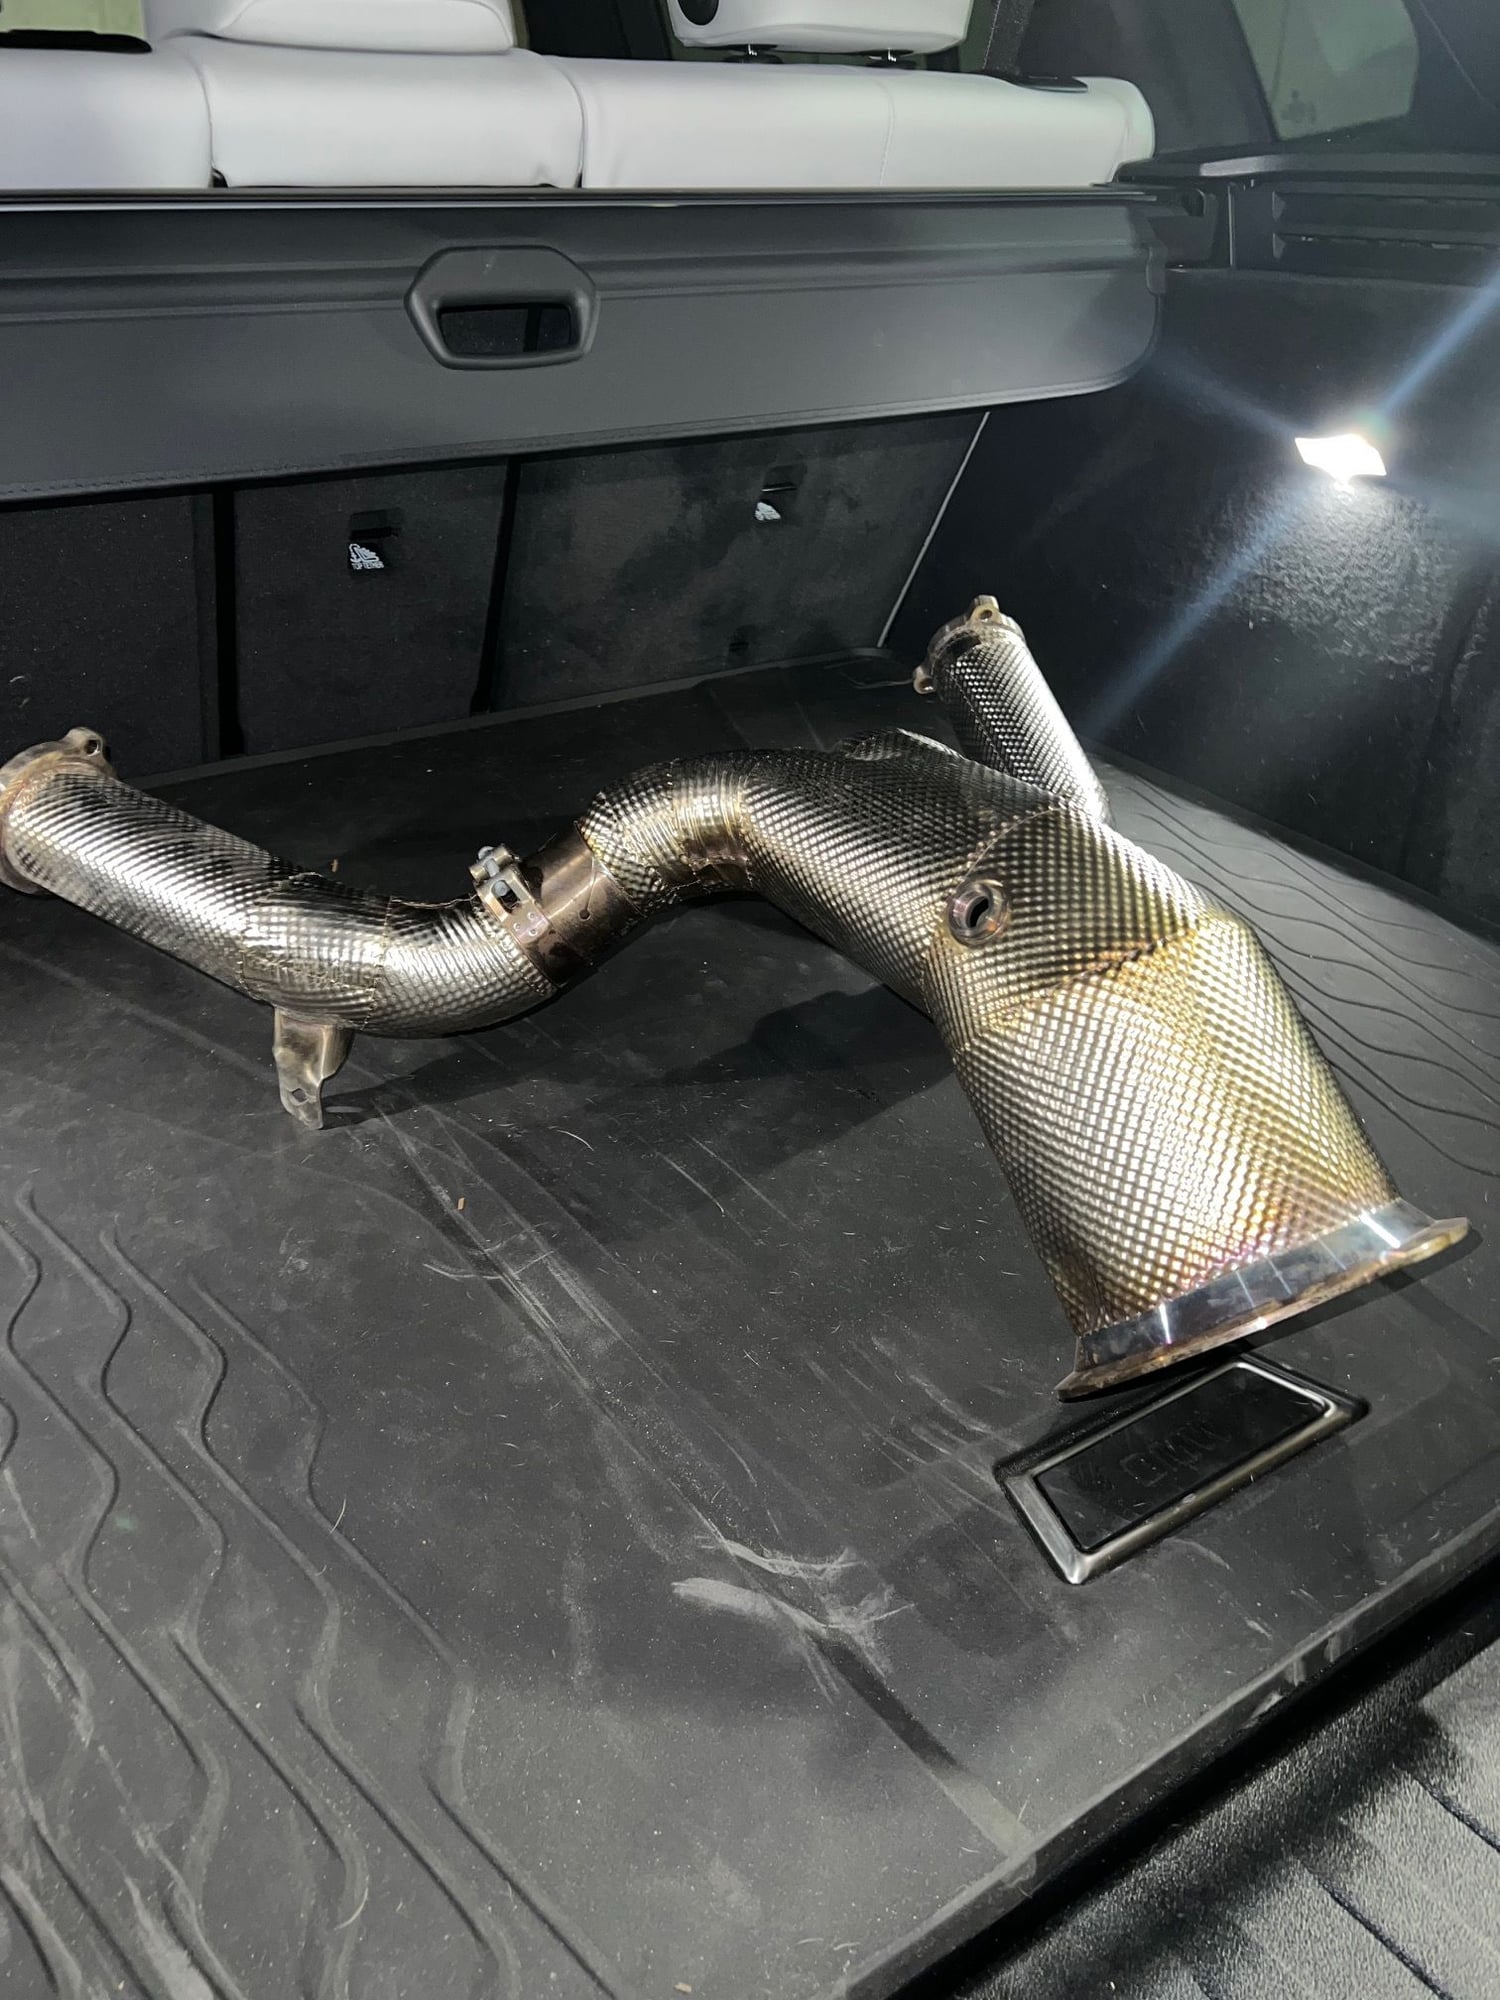 Engine - Exhaust - Red Star Exhaust Catless Downpipe with Heatshield - Used - 2019 to 2021 Audi A6 Quattro - 2019 to 2021 Audi A7 - Austin, TX 78704, United States